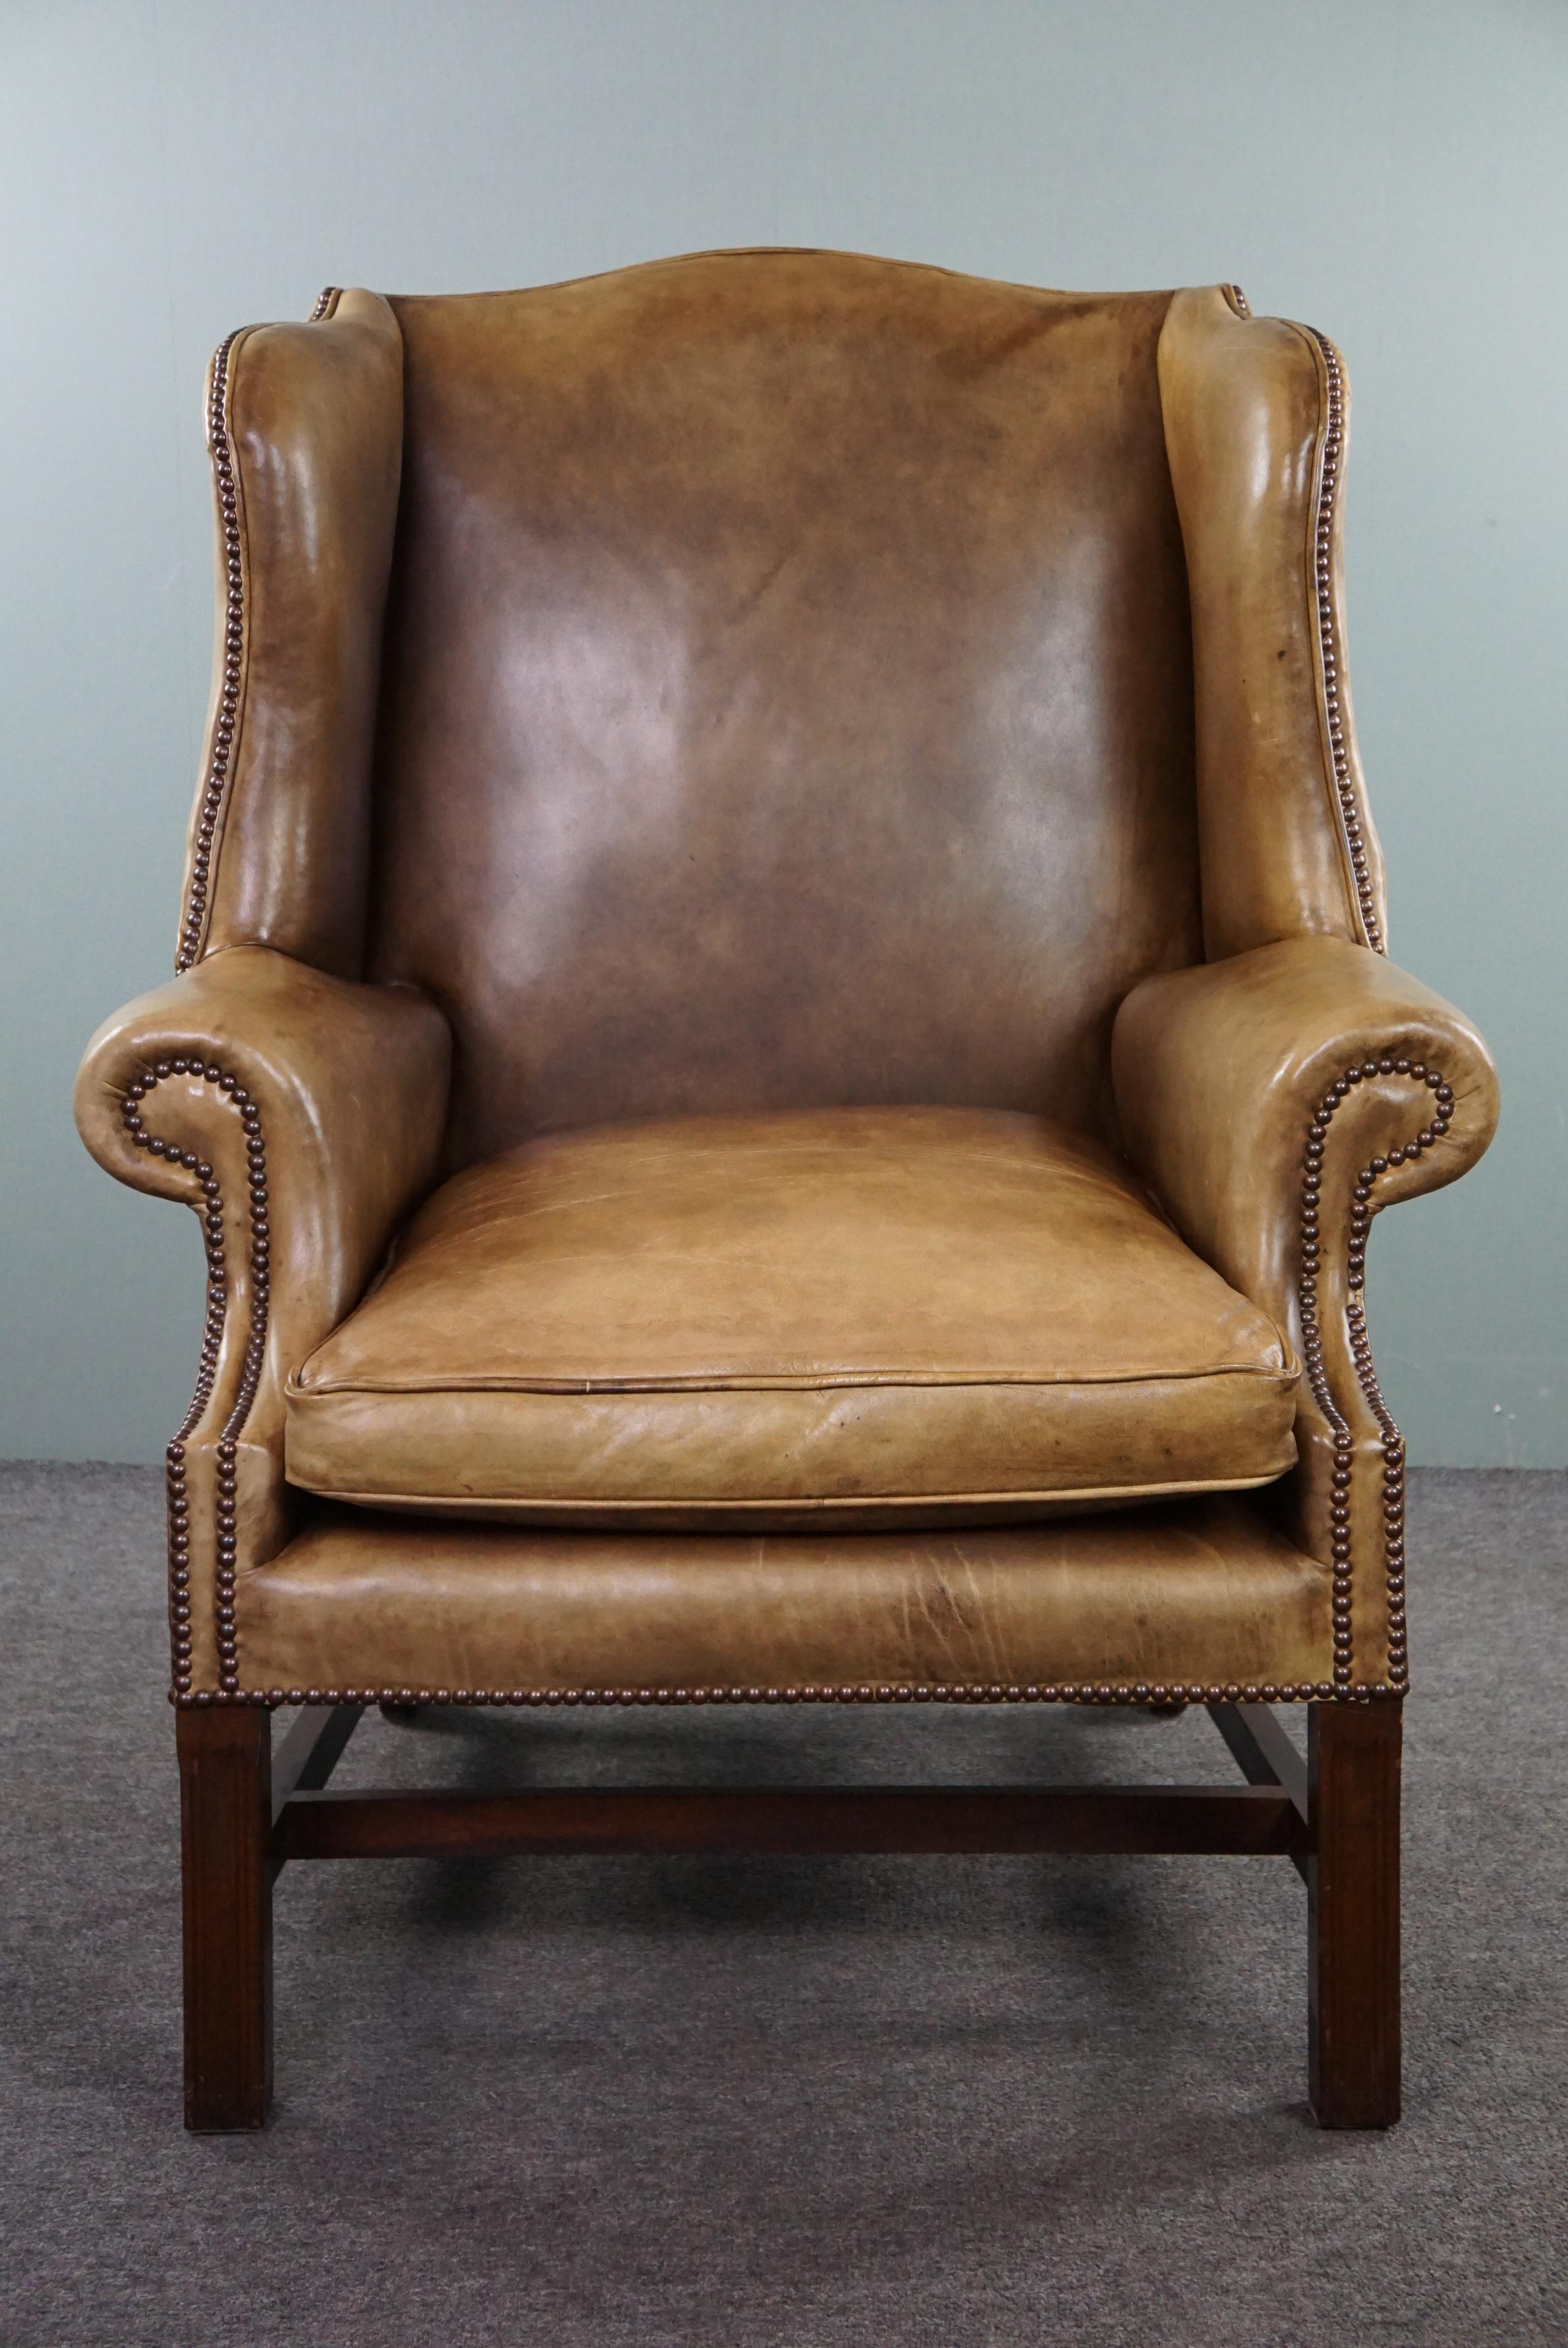 Offered this comfortable leather wingback armchair. If you're looking for an elegant wingback chair made of cowhide, then this extremely comfortable blonde leather wingback armchair might be the perfect choice for you. This armchair combines style